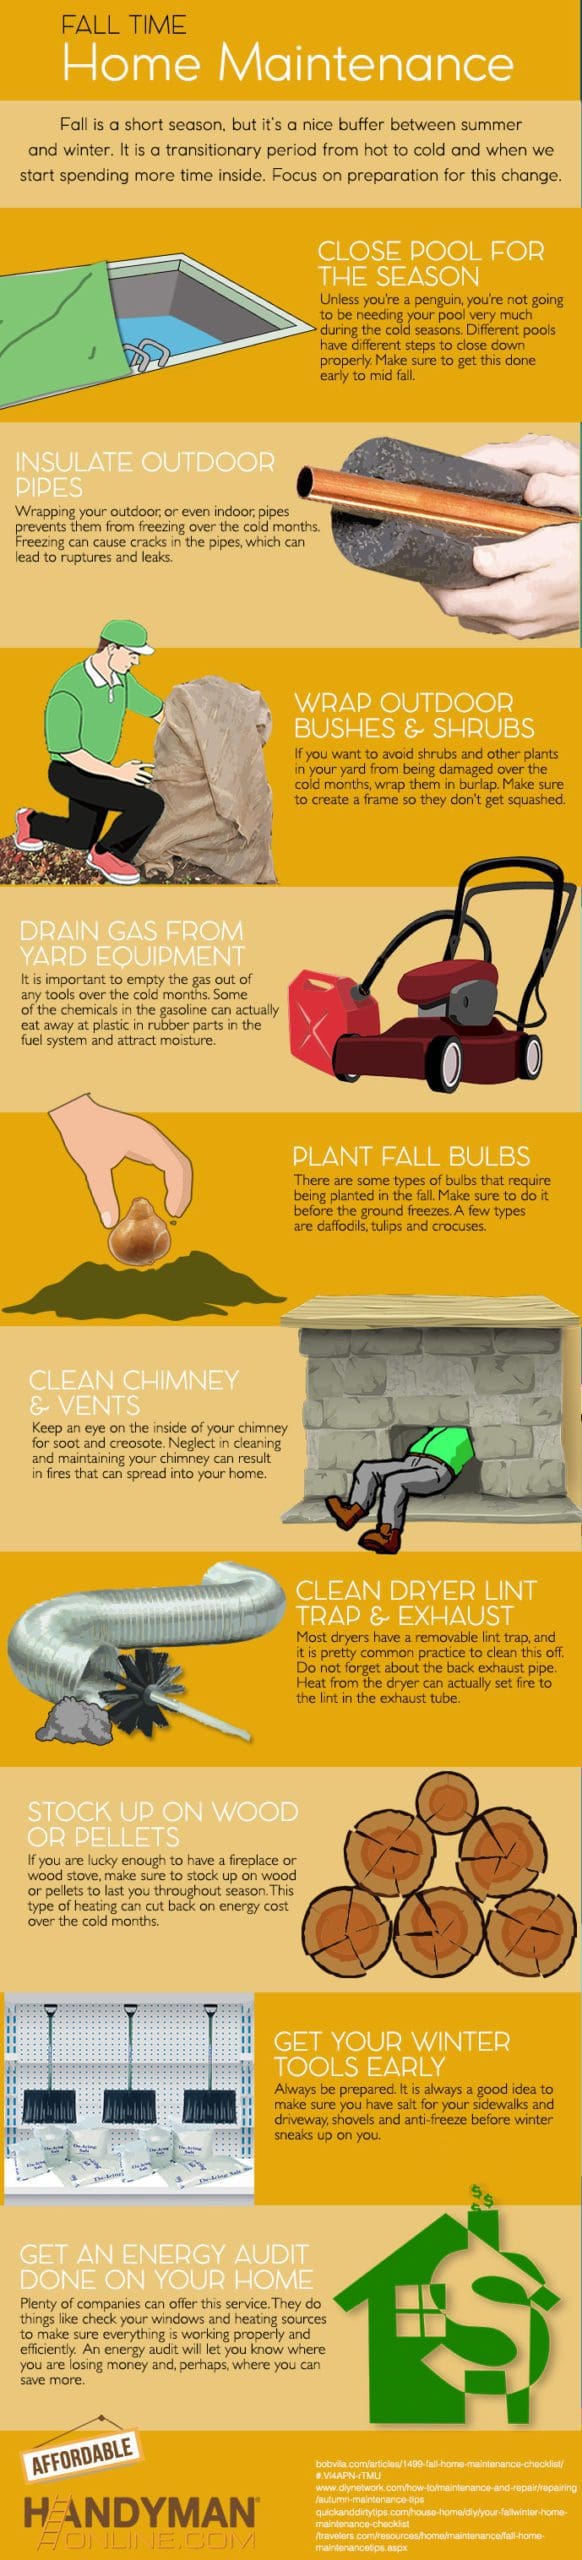 February Home Maintenance Checklist for Cleaning and More